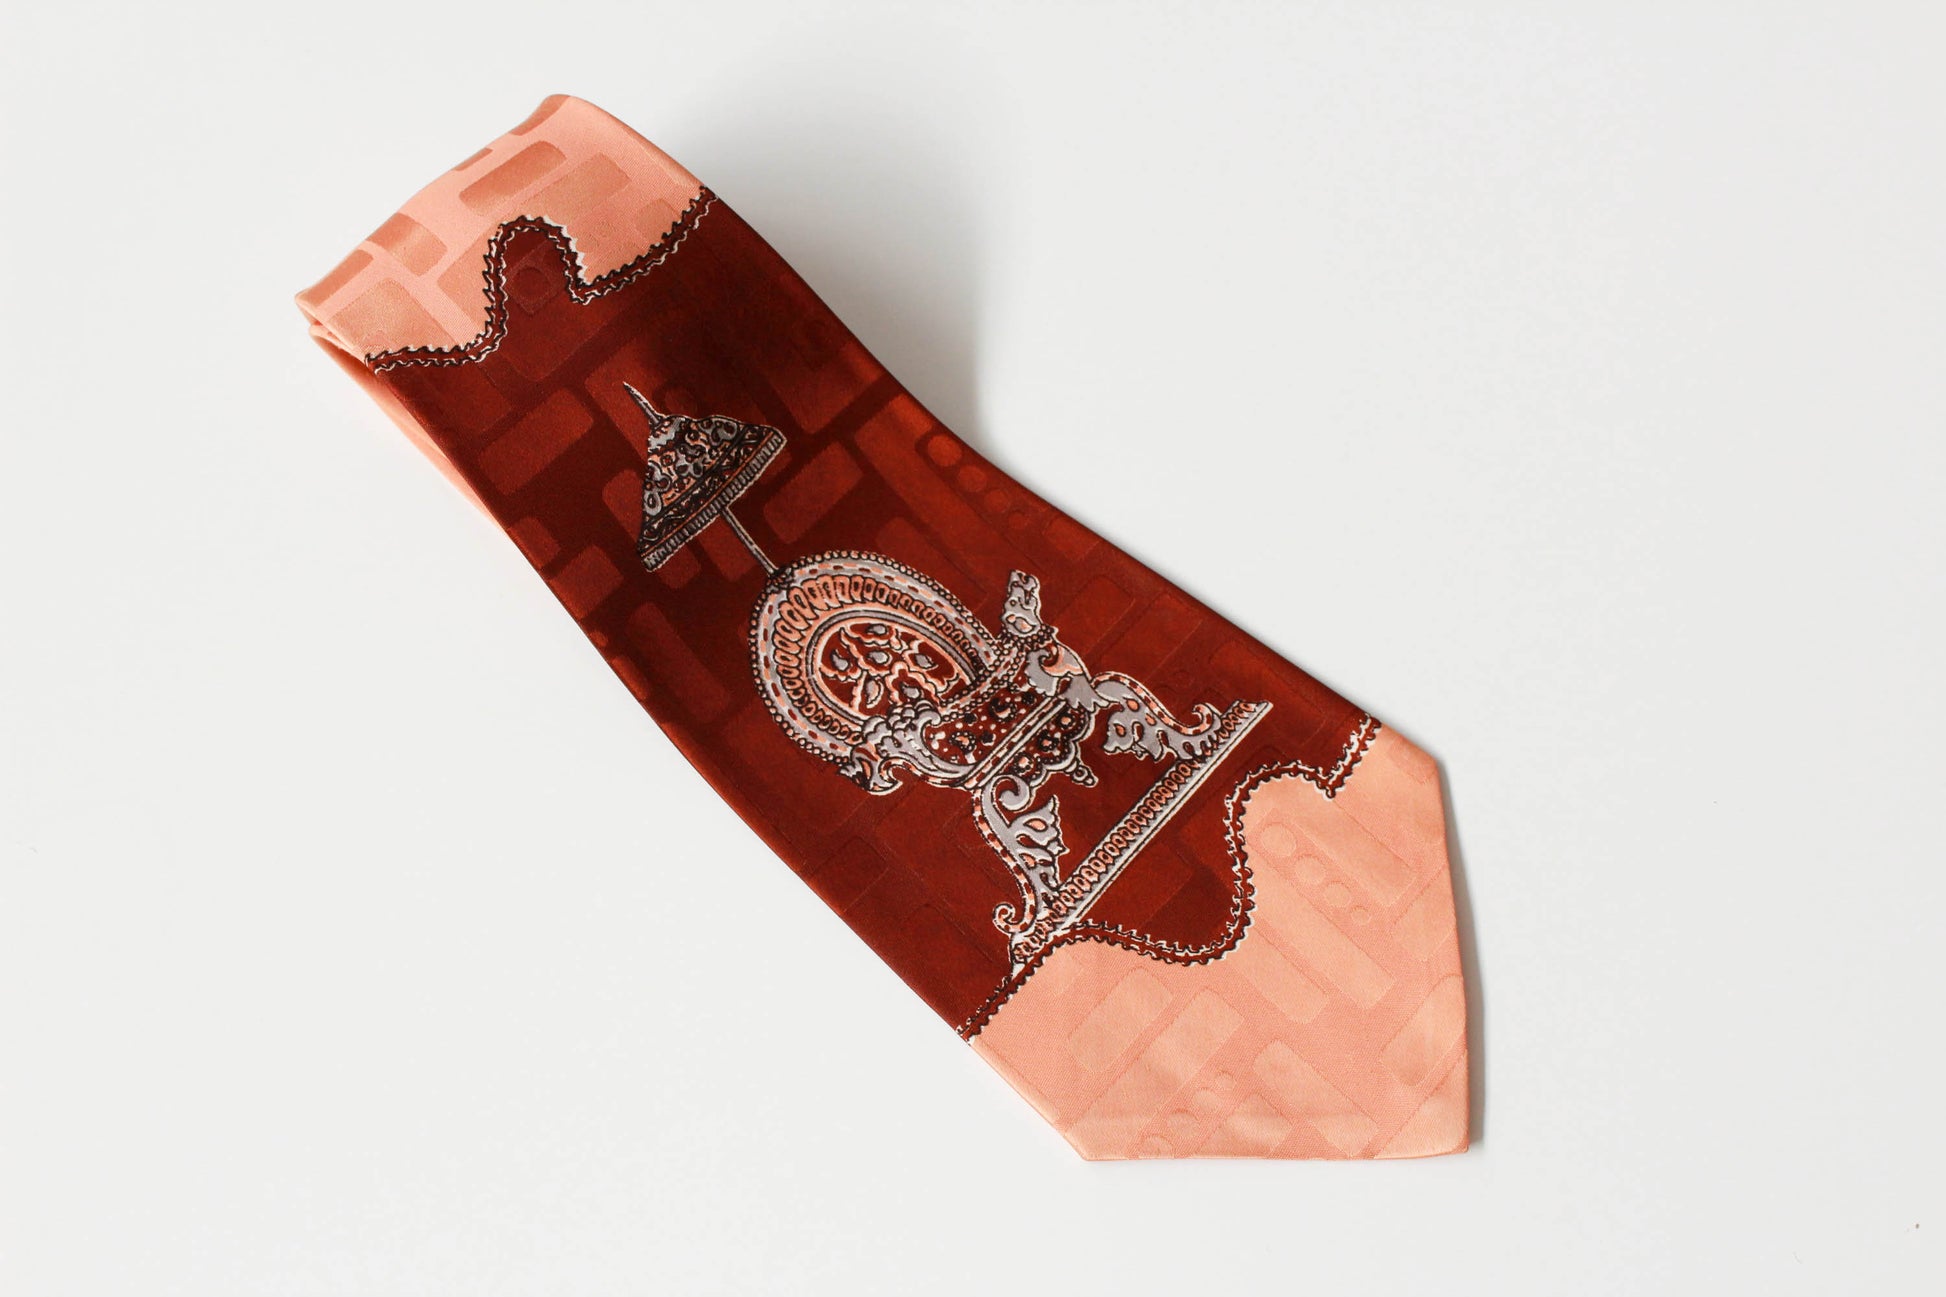 1940s ornate chair and lamp print rayon necktie by Manhattan, wide tongue bold look swing tie, brown and peach 